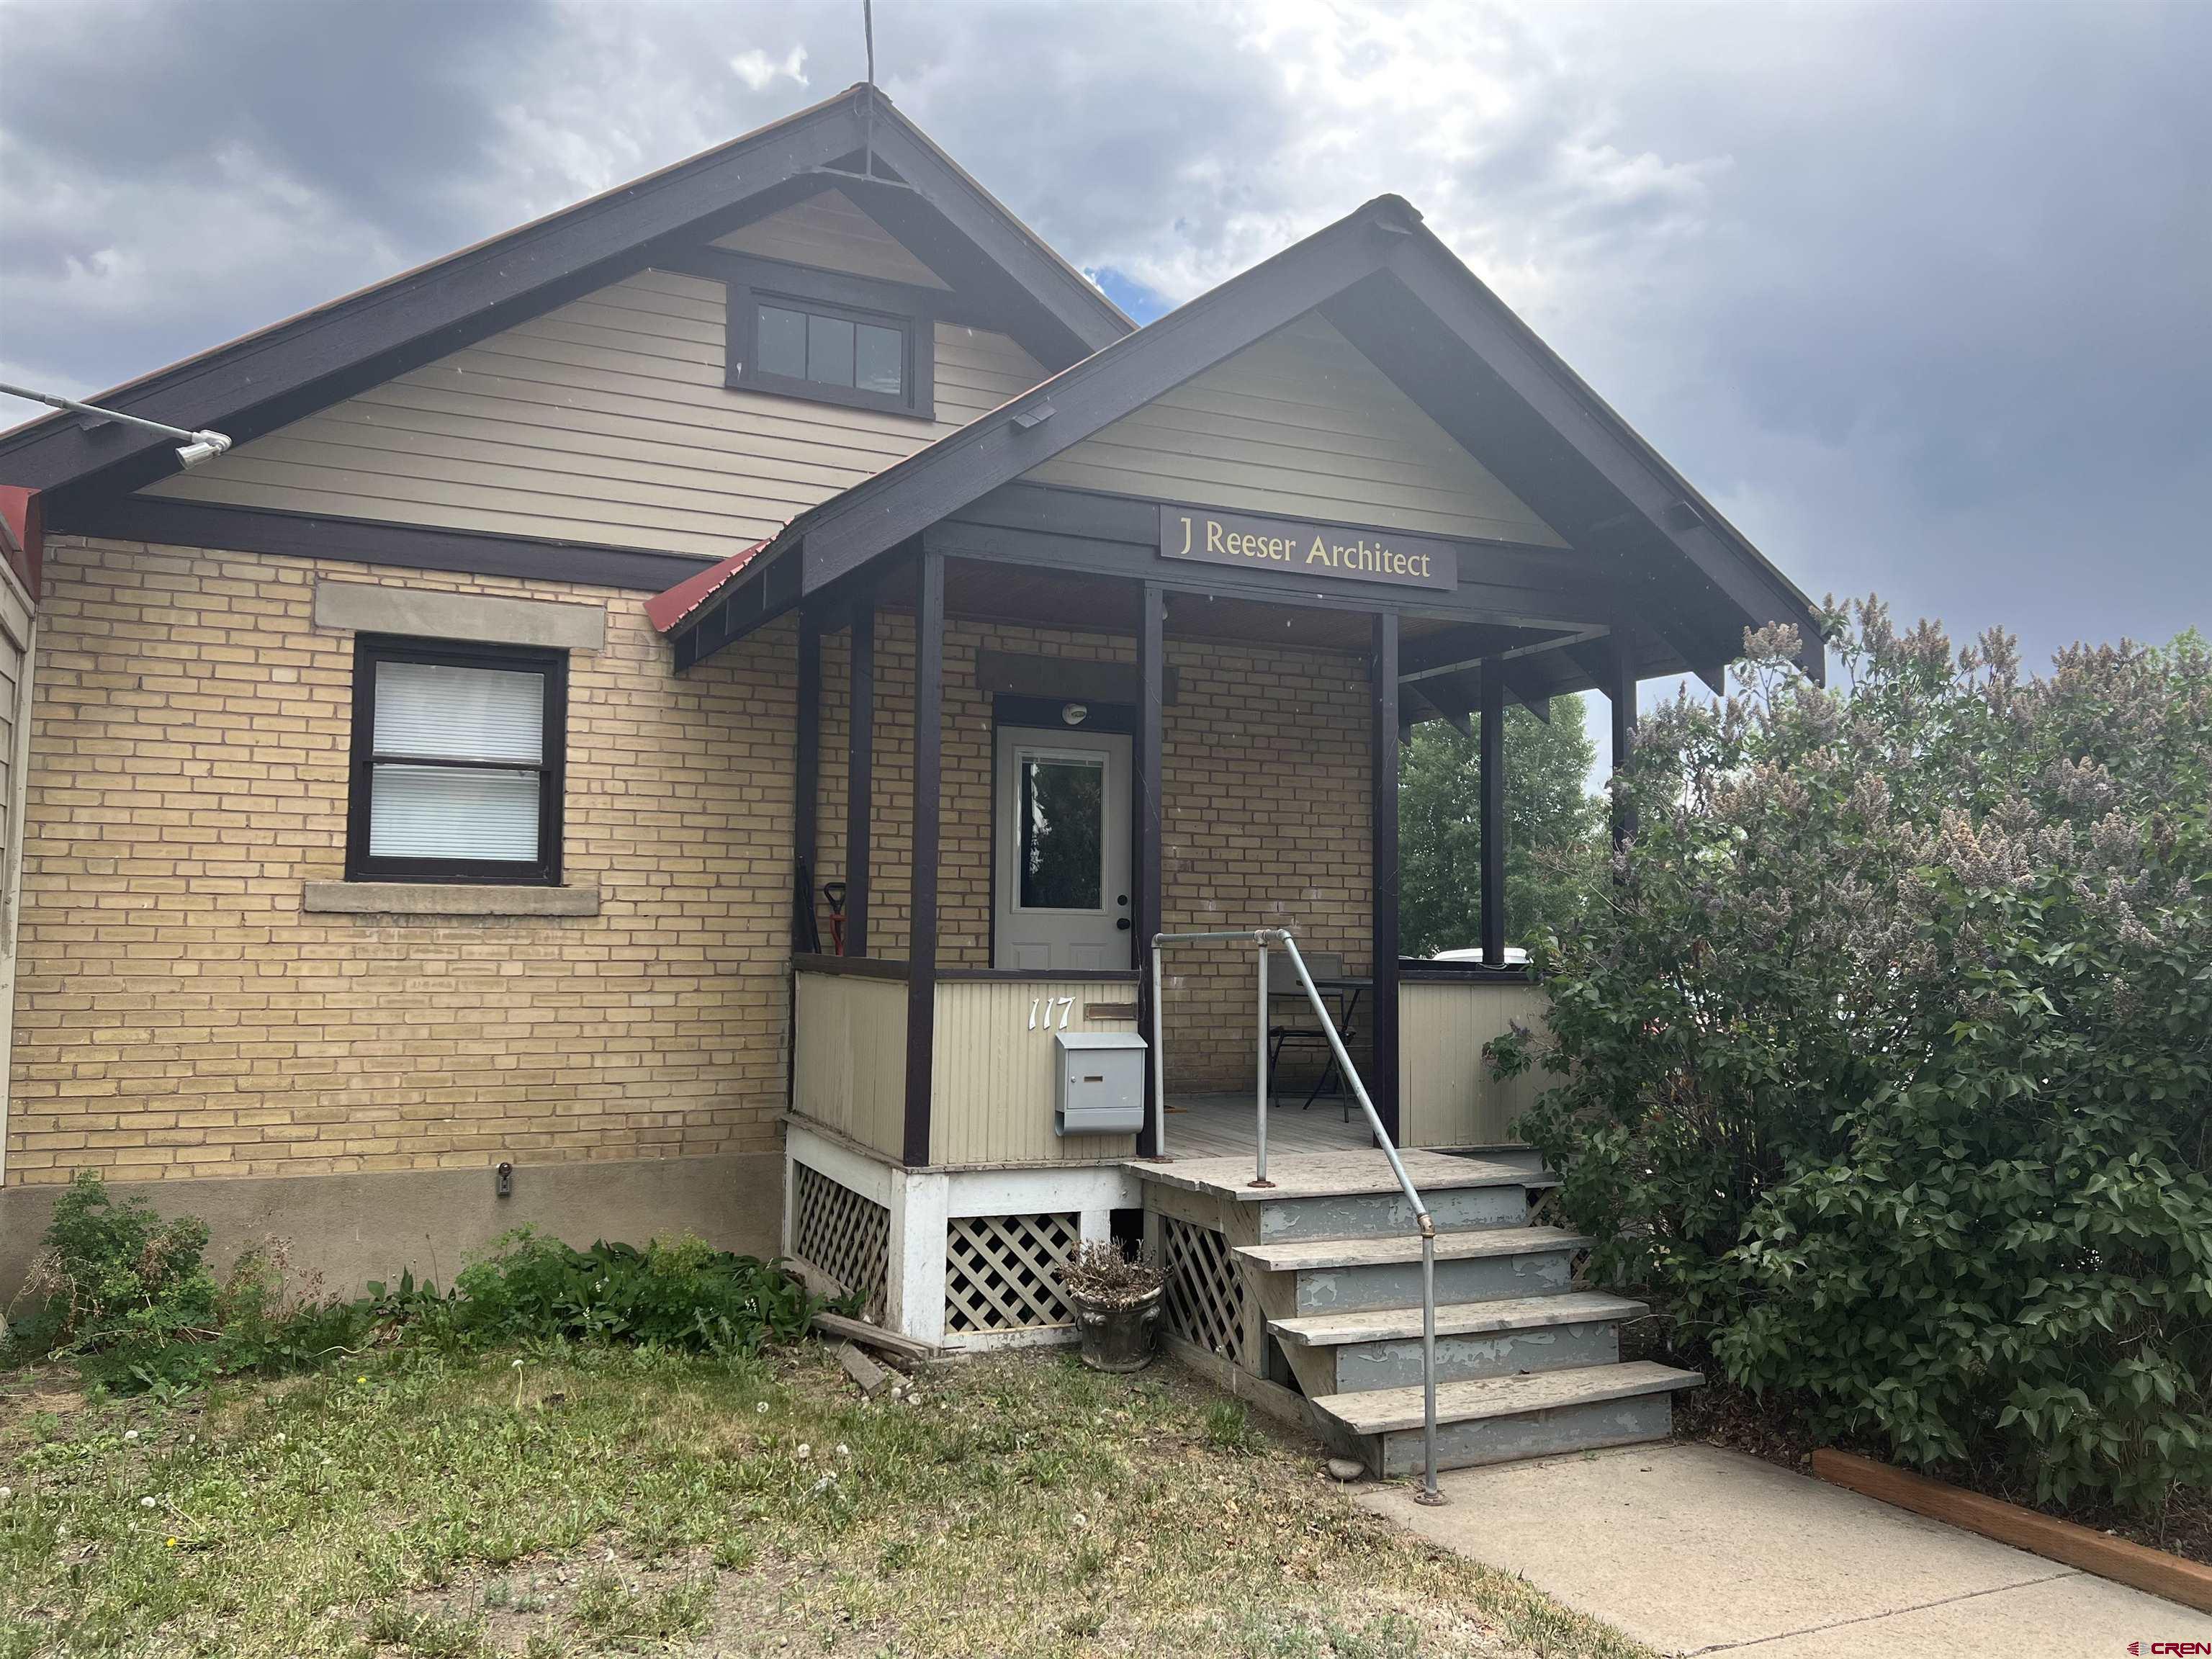 Tired of looking for commercial rental space?  You could own this office building with basement and 1,700 square feet with kitchen and bathroom.  Great location just one block off of Main Street.